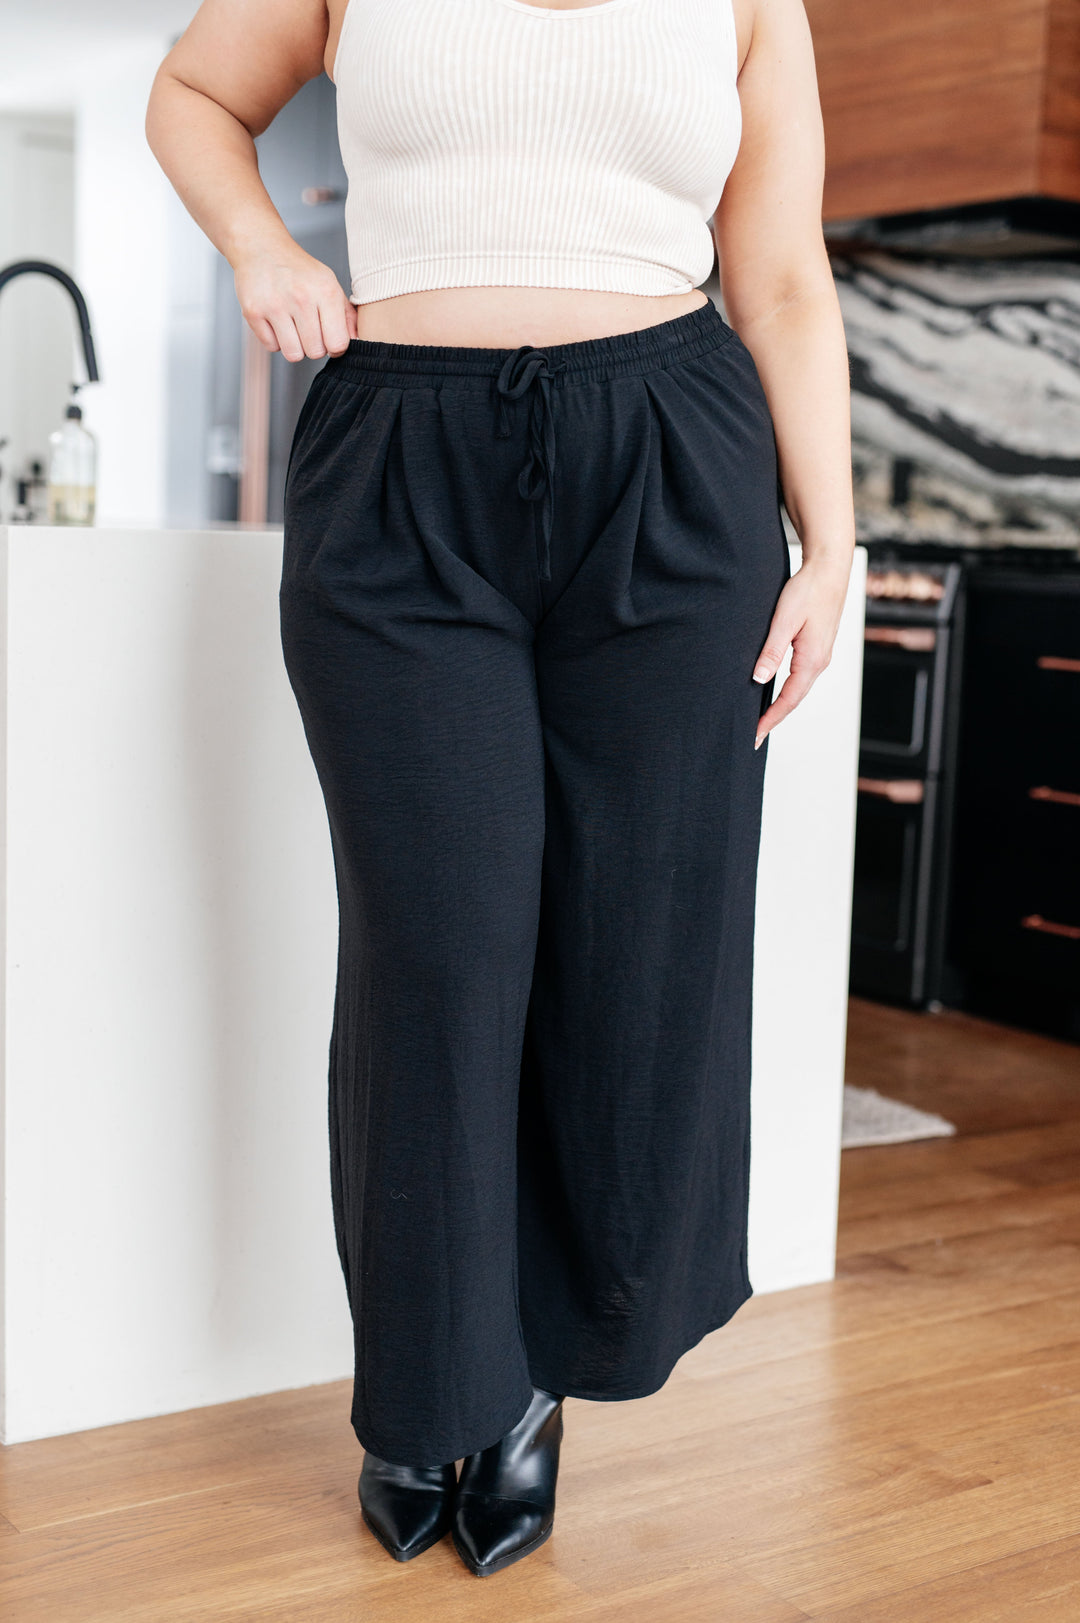 Send it On Wide Leg Pants-Pants-Inspired by Justeen-Women's Clothing Boutique in Chicago, Illinois